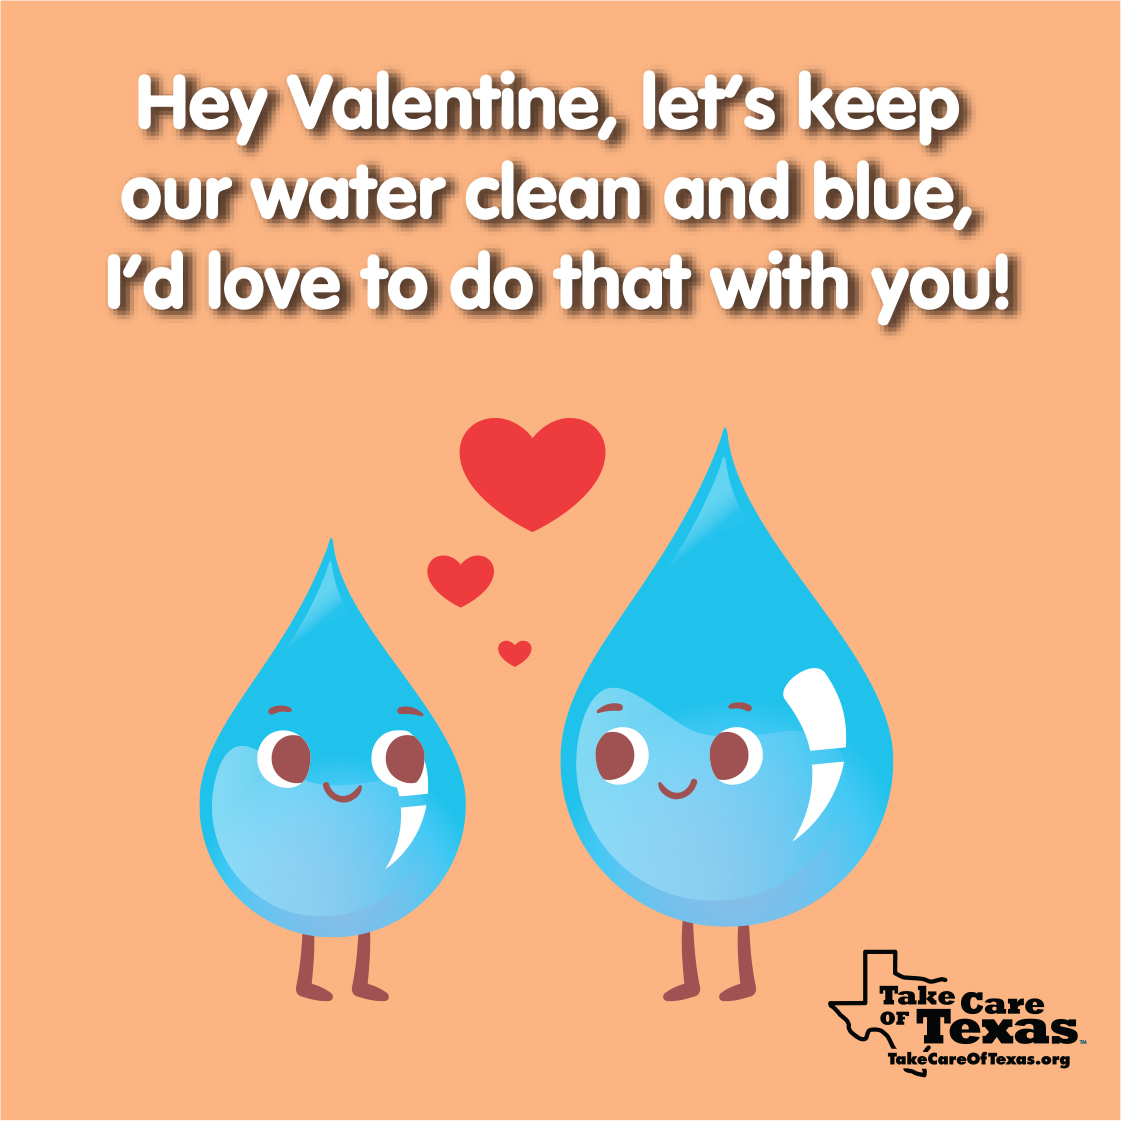 Water drops with the text "Hey Valentine, let's keep our water clean and blue, I'd love to do that with you!"